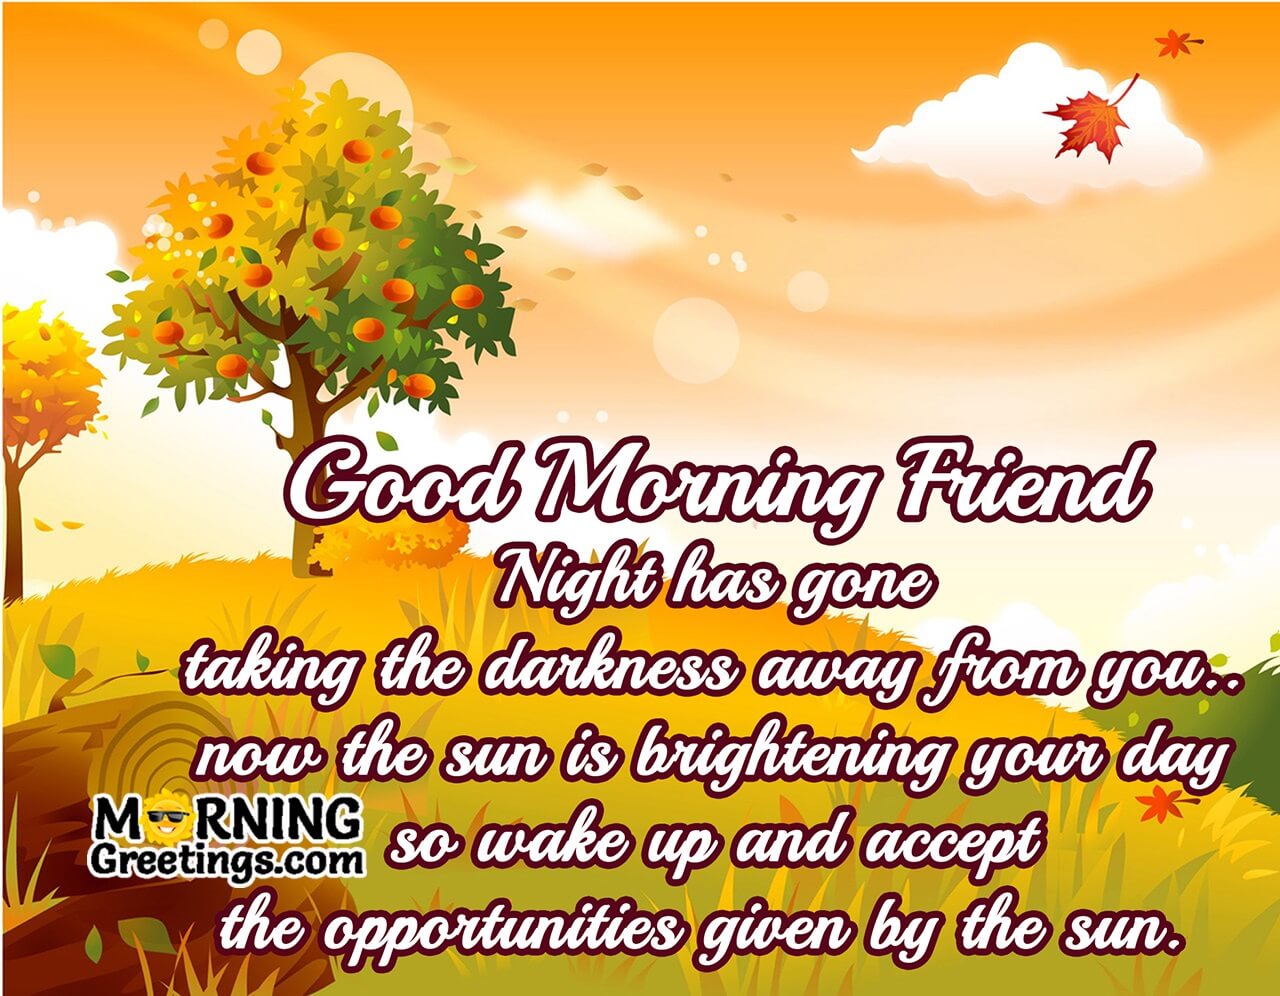 Good morning messages for friends